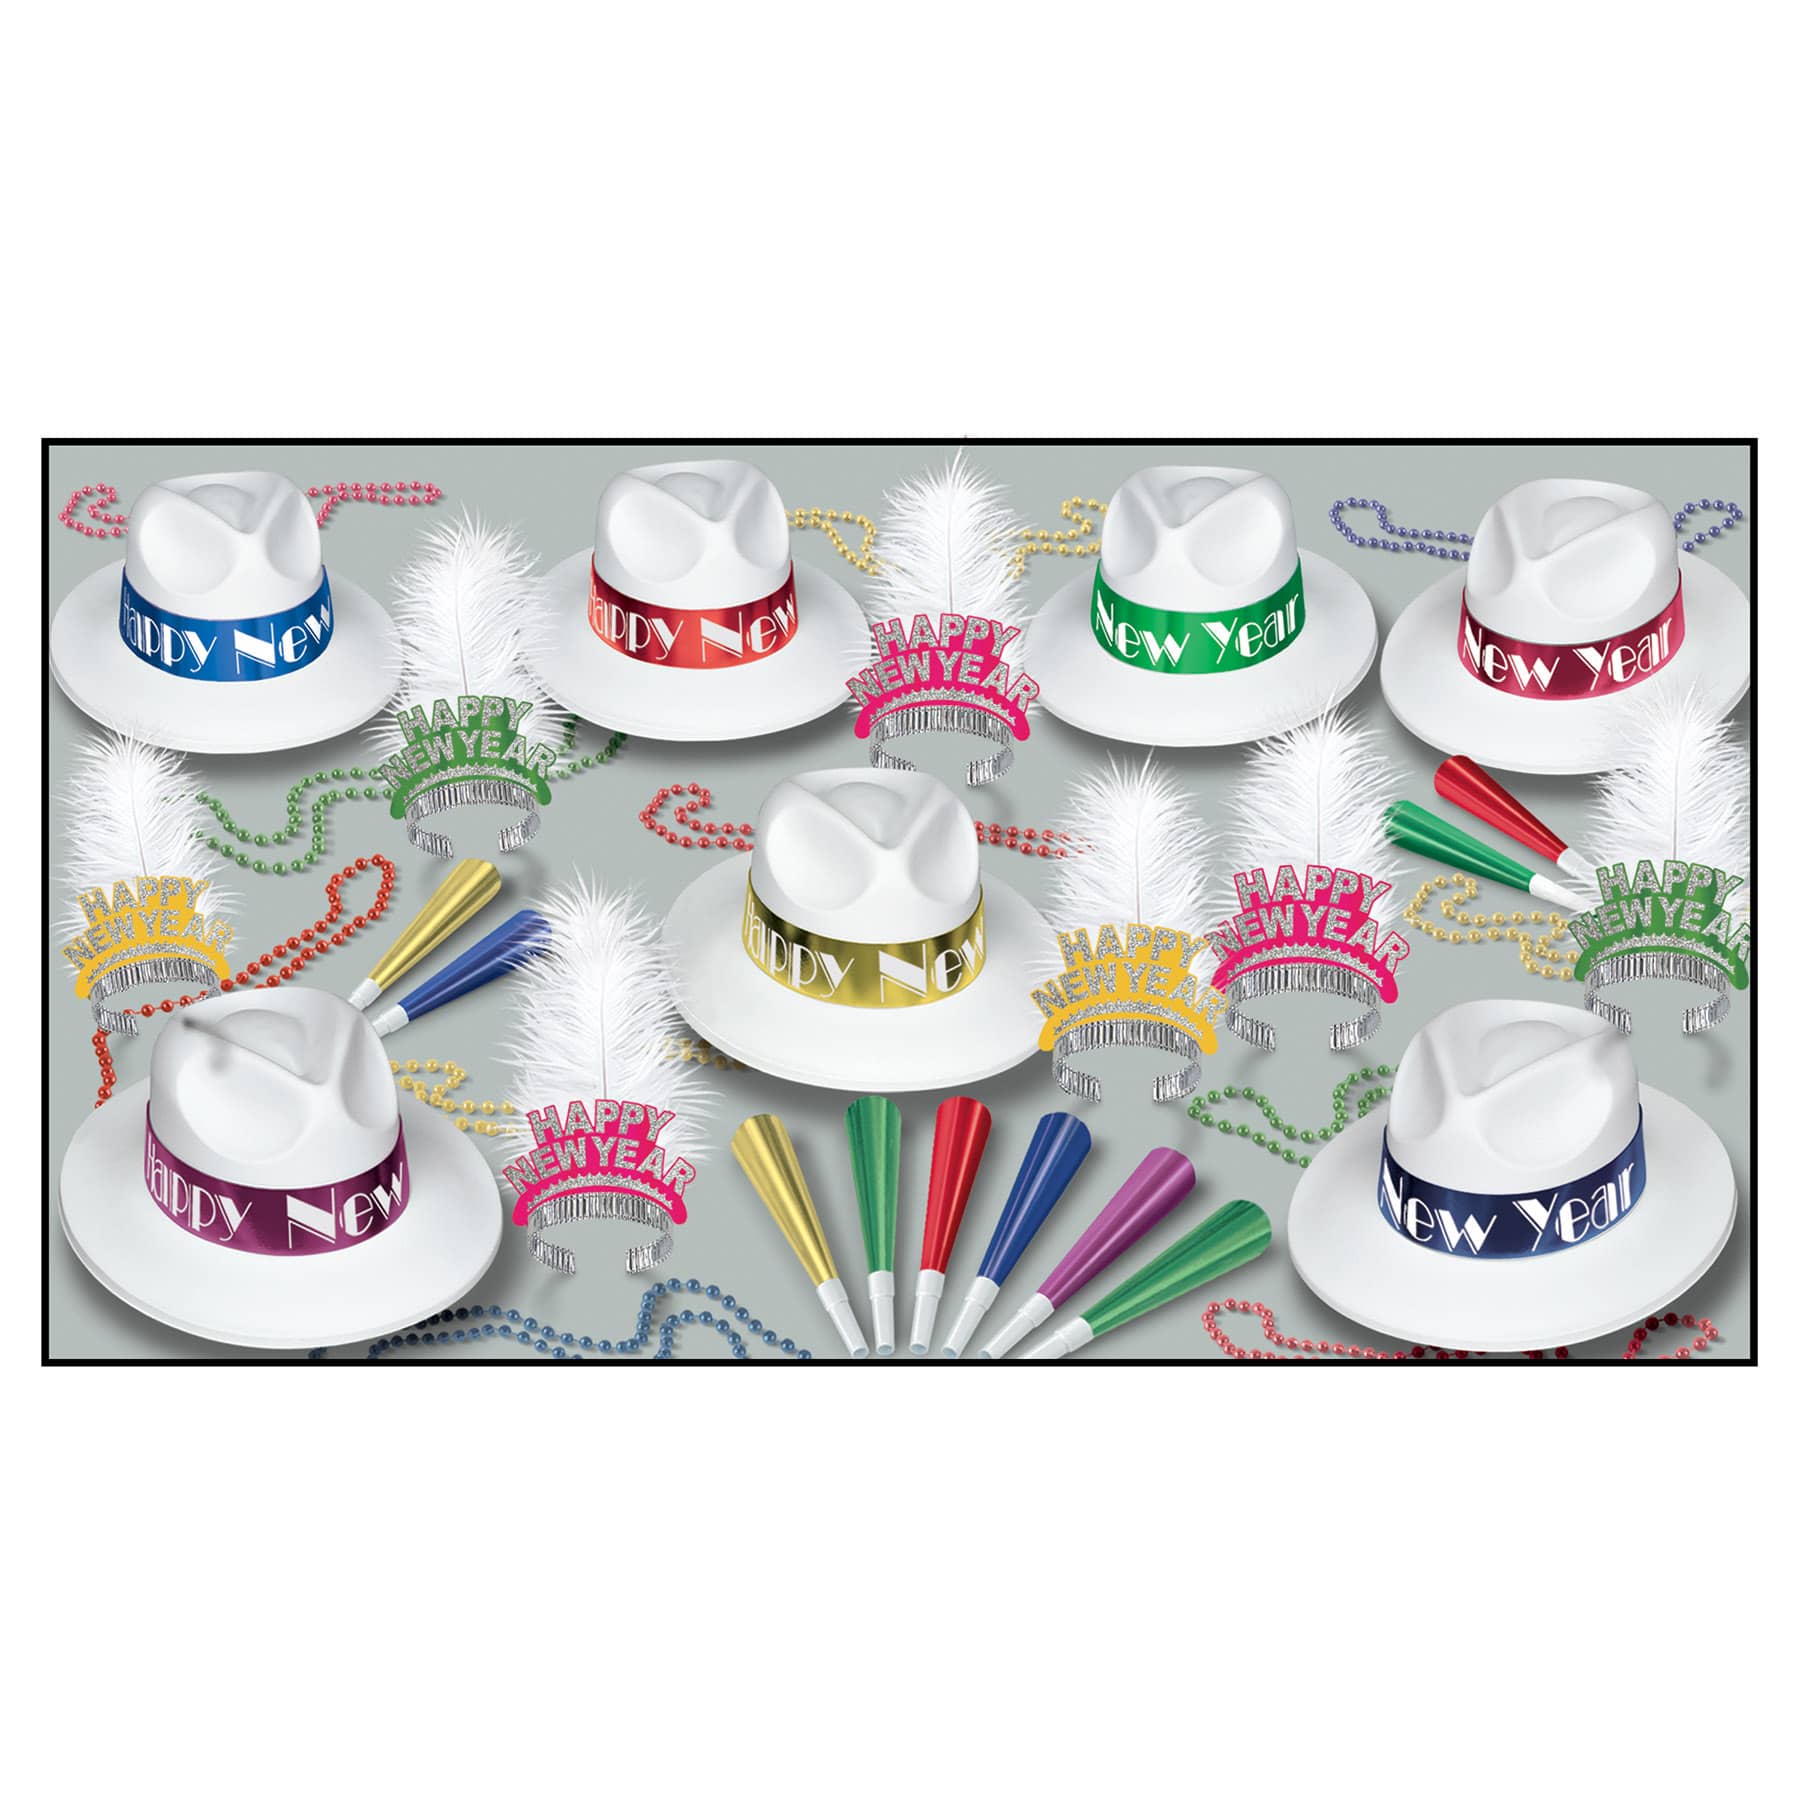 Party kit for new years eve that has white fedora party hats with tiaras, horns, and beads all in bright colors